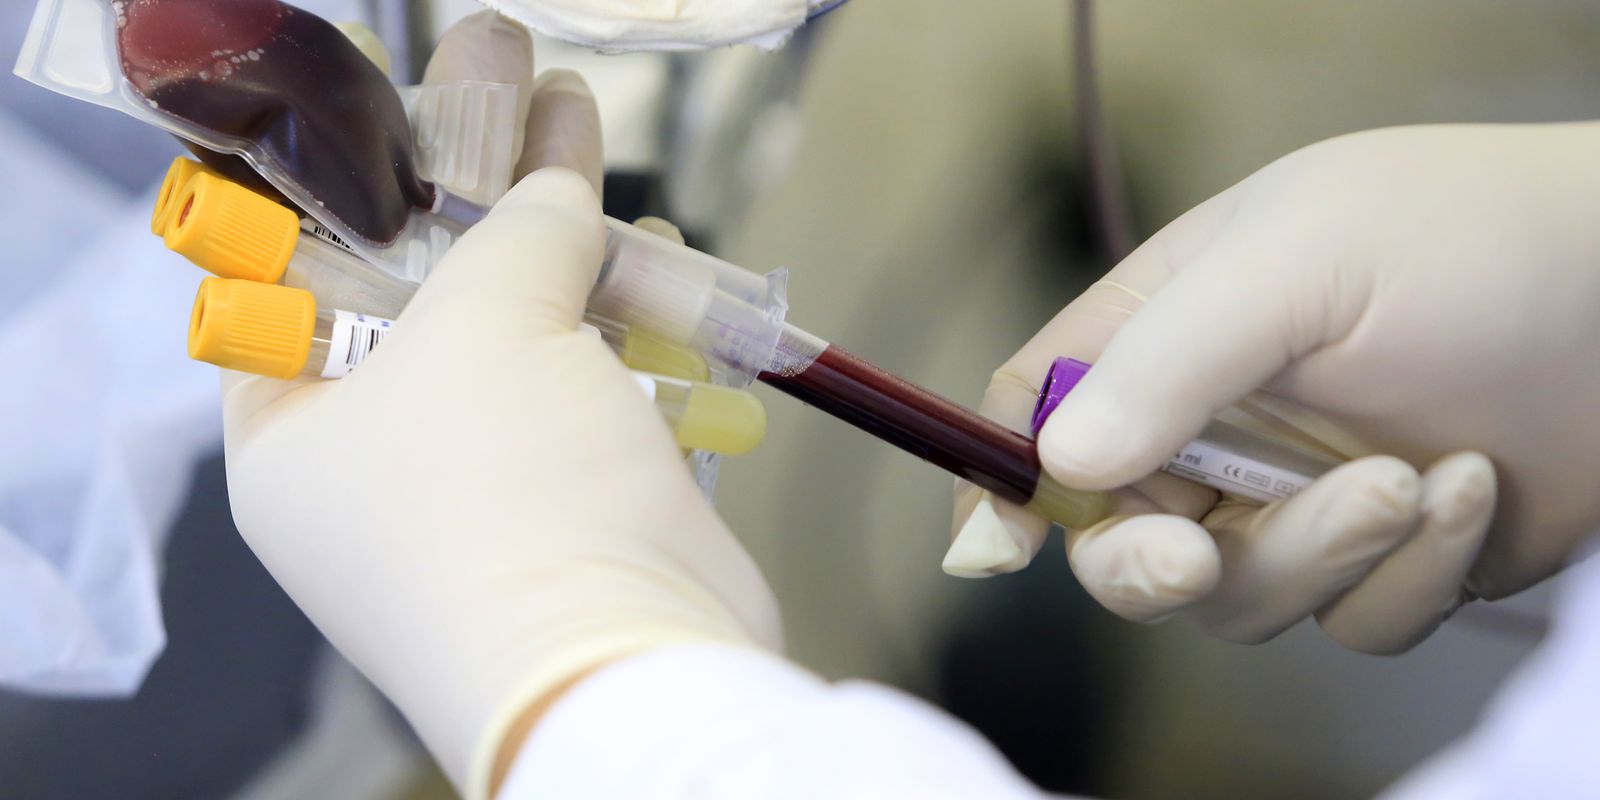 Government invested BRL 1.1 billion to treat hemophilia in 2021